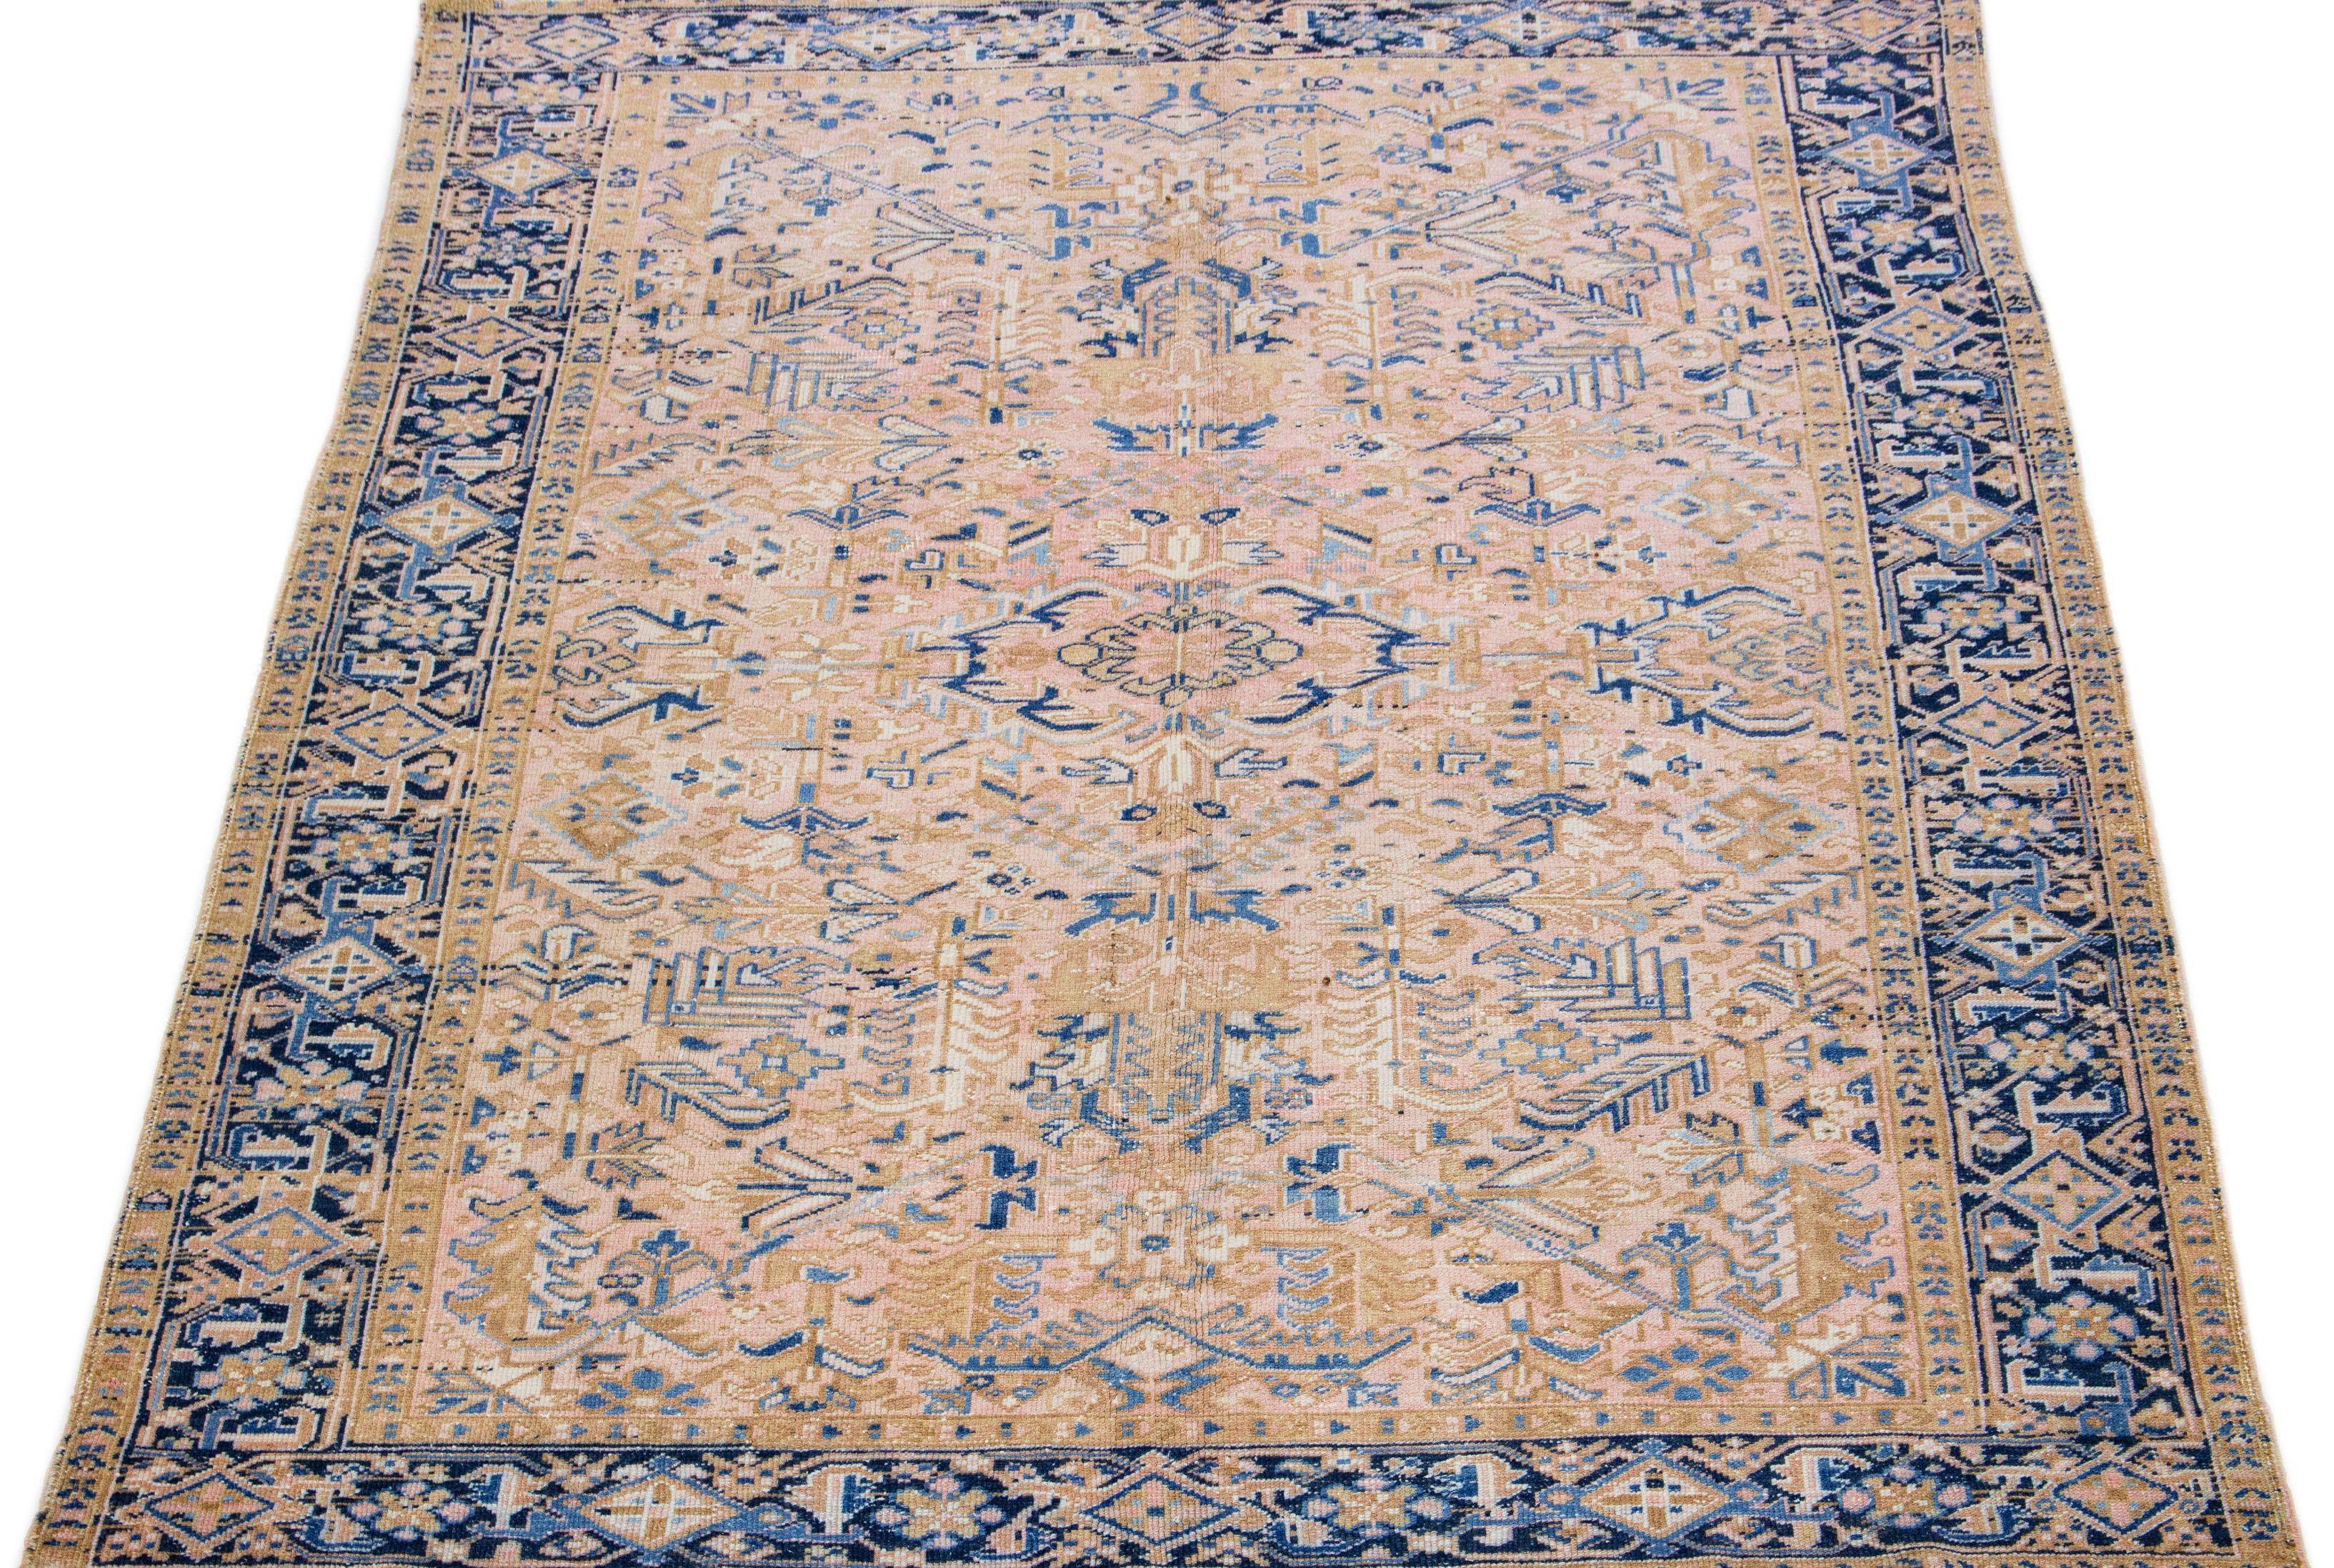 This Persian rug boasts a splendid all-over design with an eye-catching geometric floral pattern in shades of blue and brown set against a soft peach field. Using premium hand-knotted wool, this antique Heriz rug radiates eternal class and